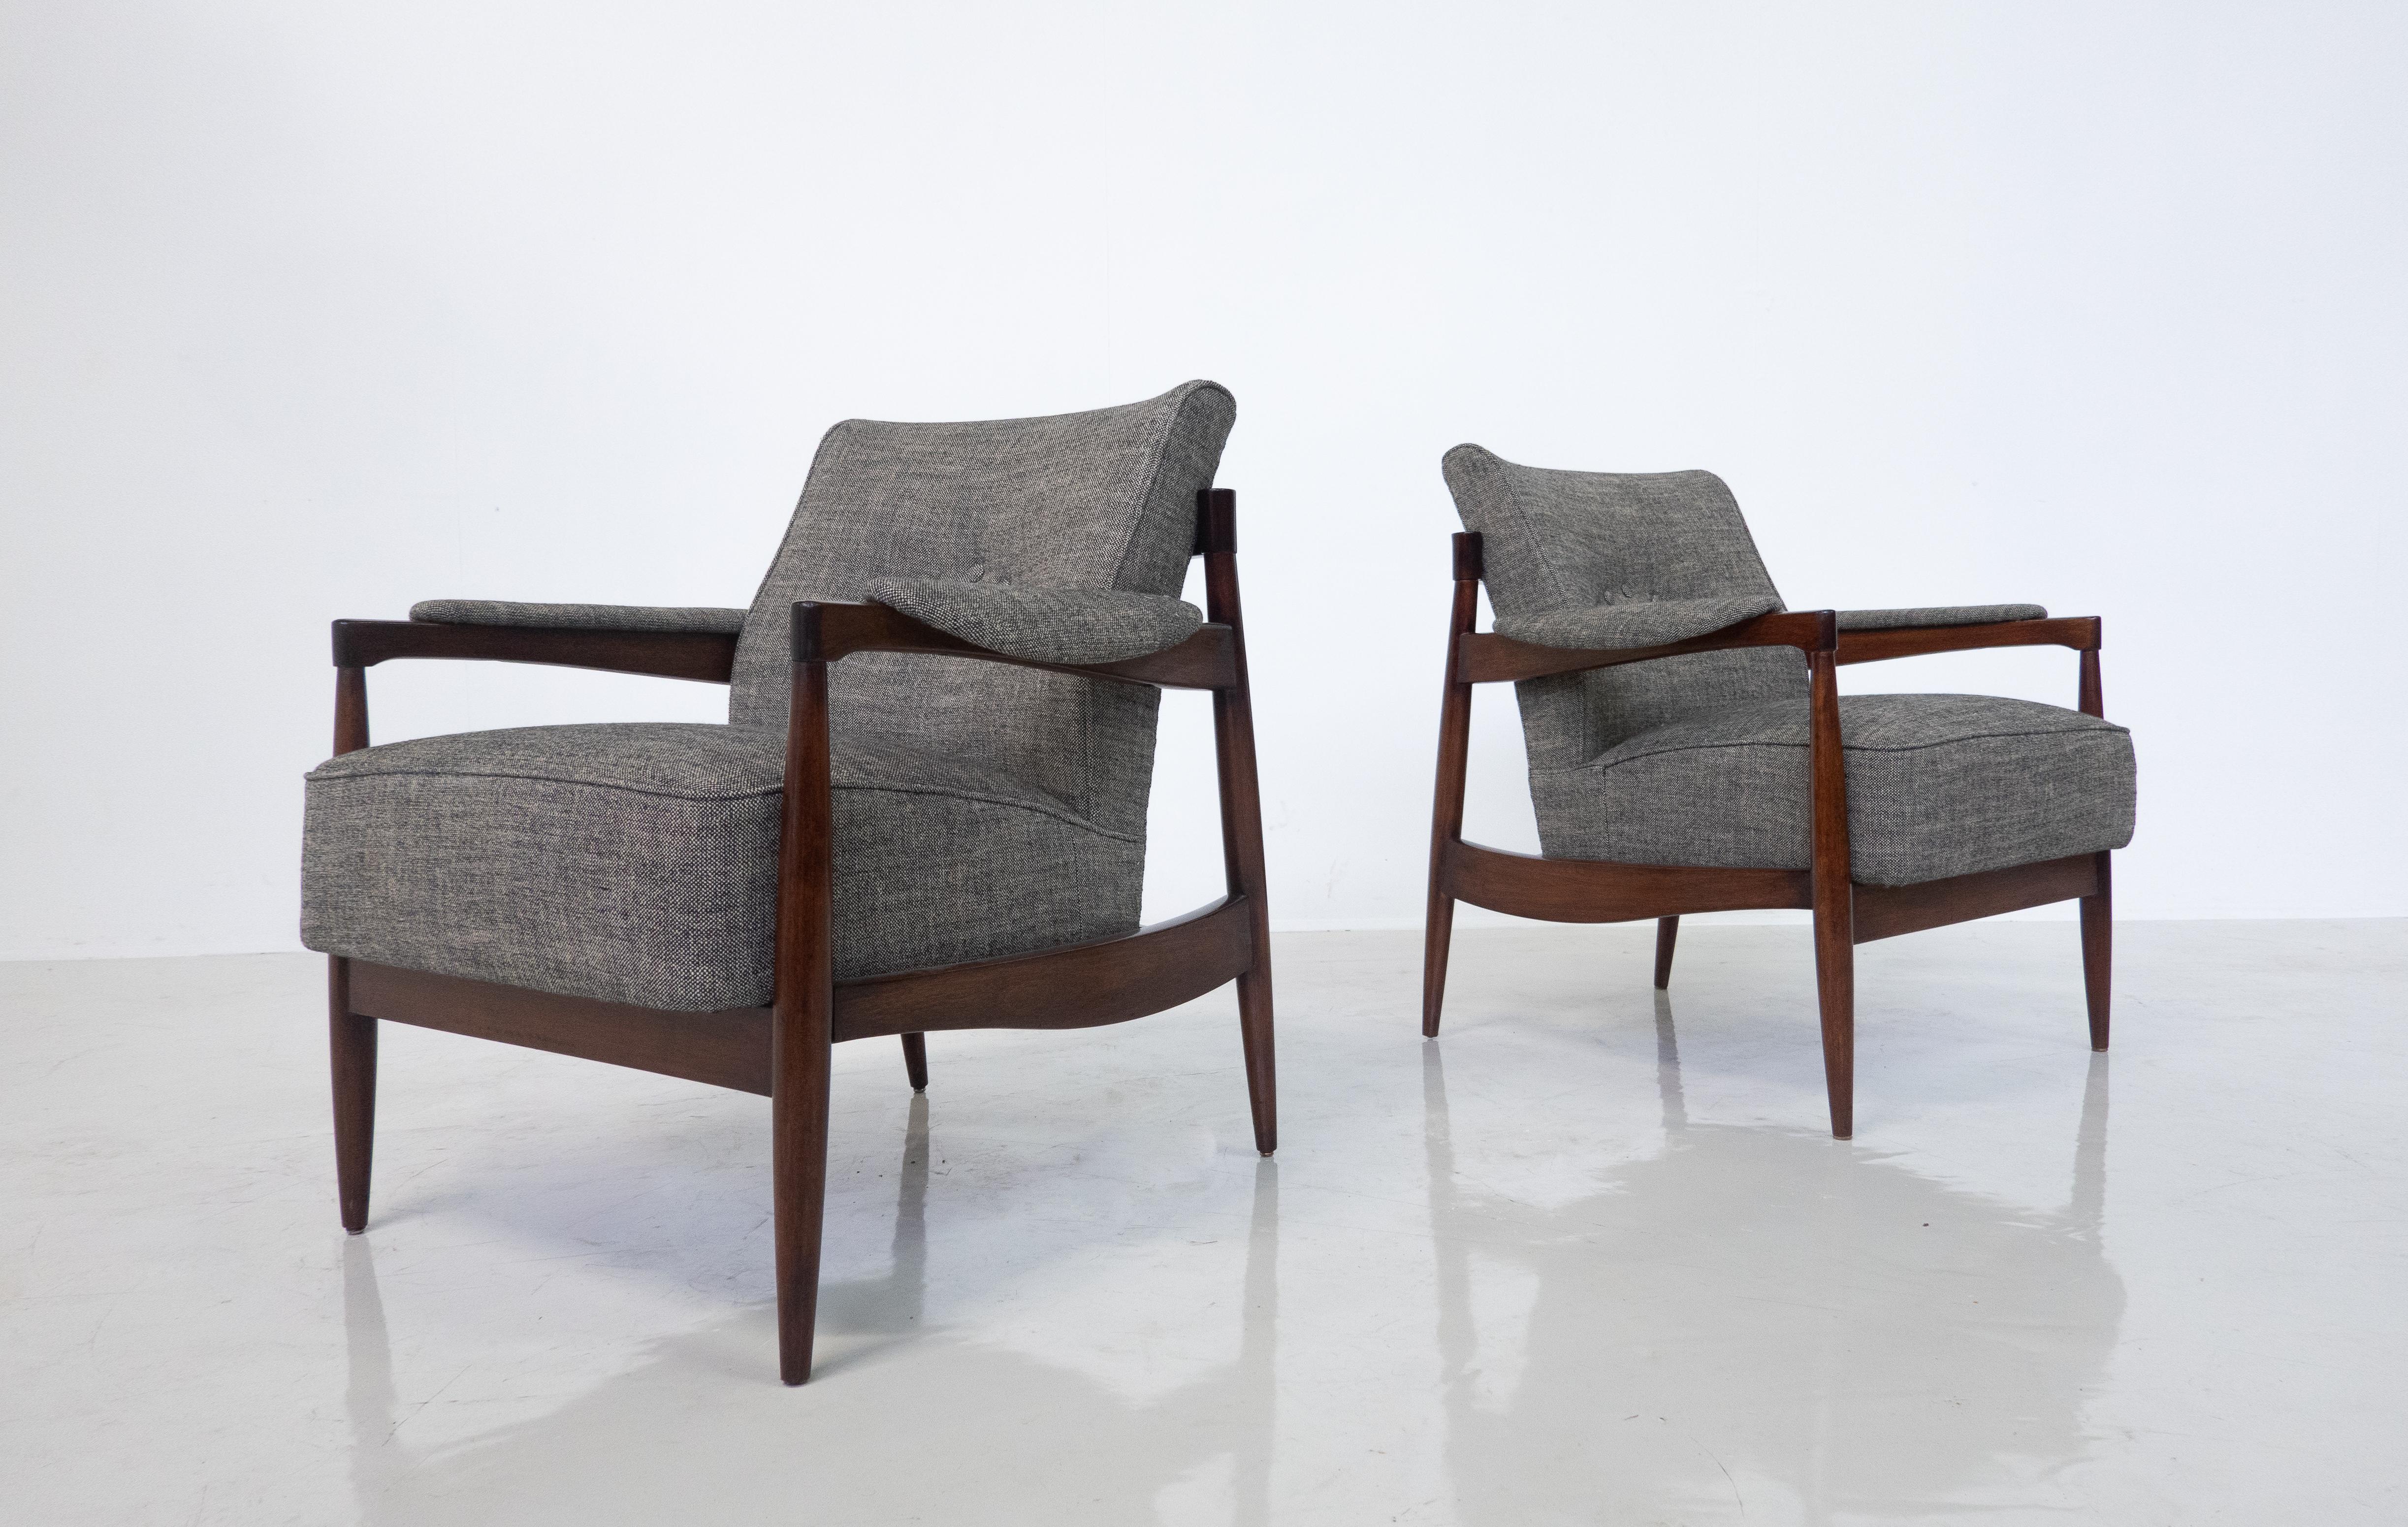 Mid-Century Modern Pair of Armchairs, Wood and Grey Fabric, Italy, 1960s - New Upholstery